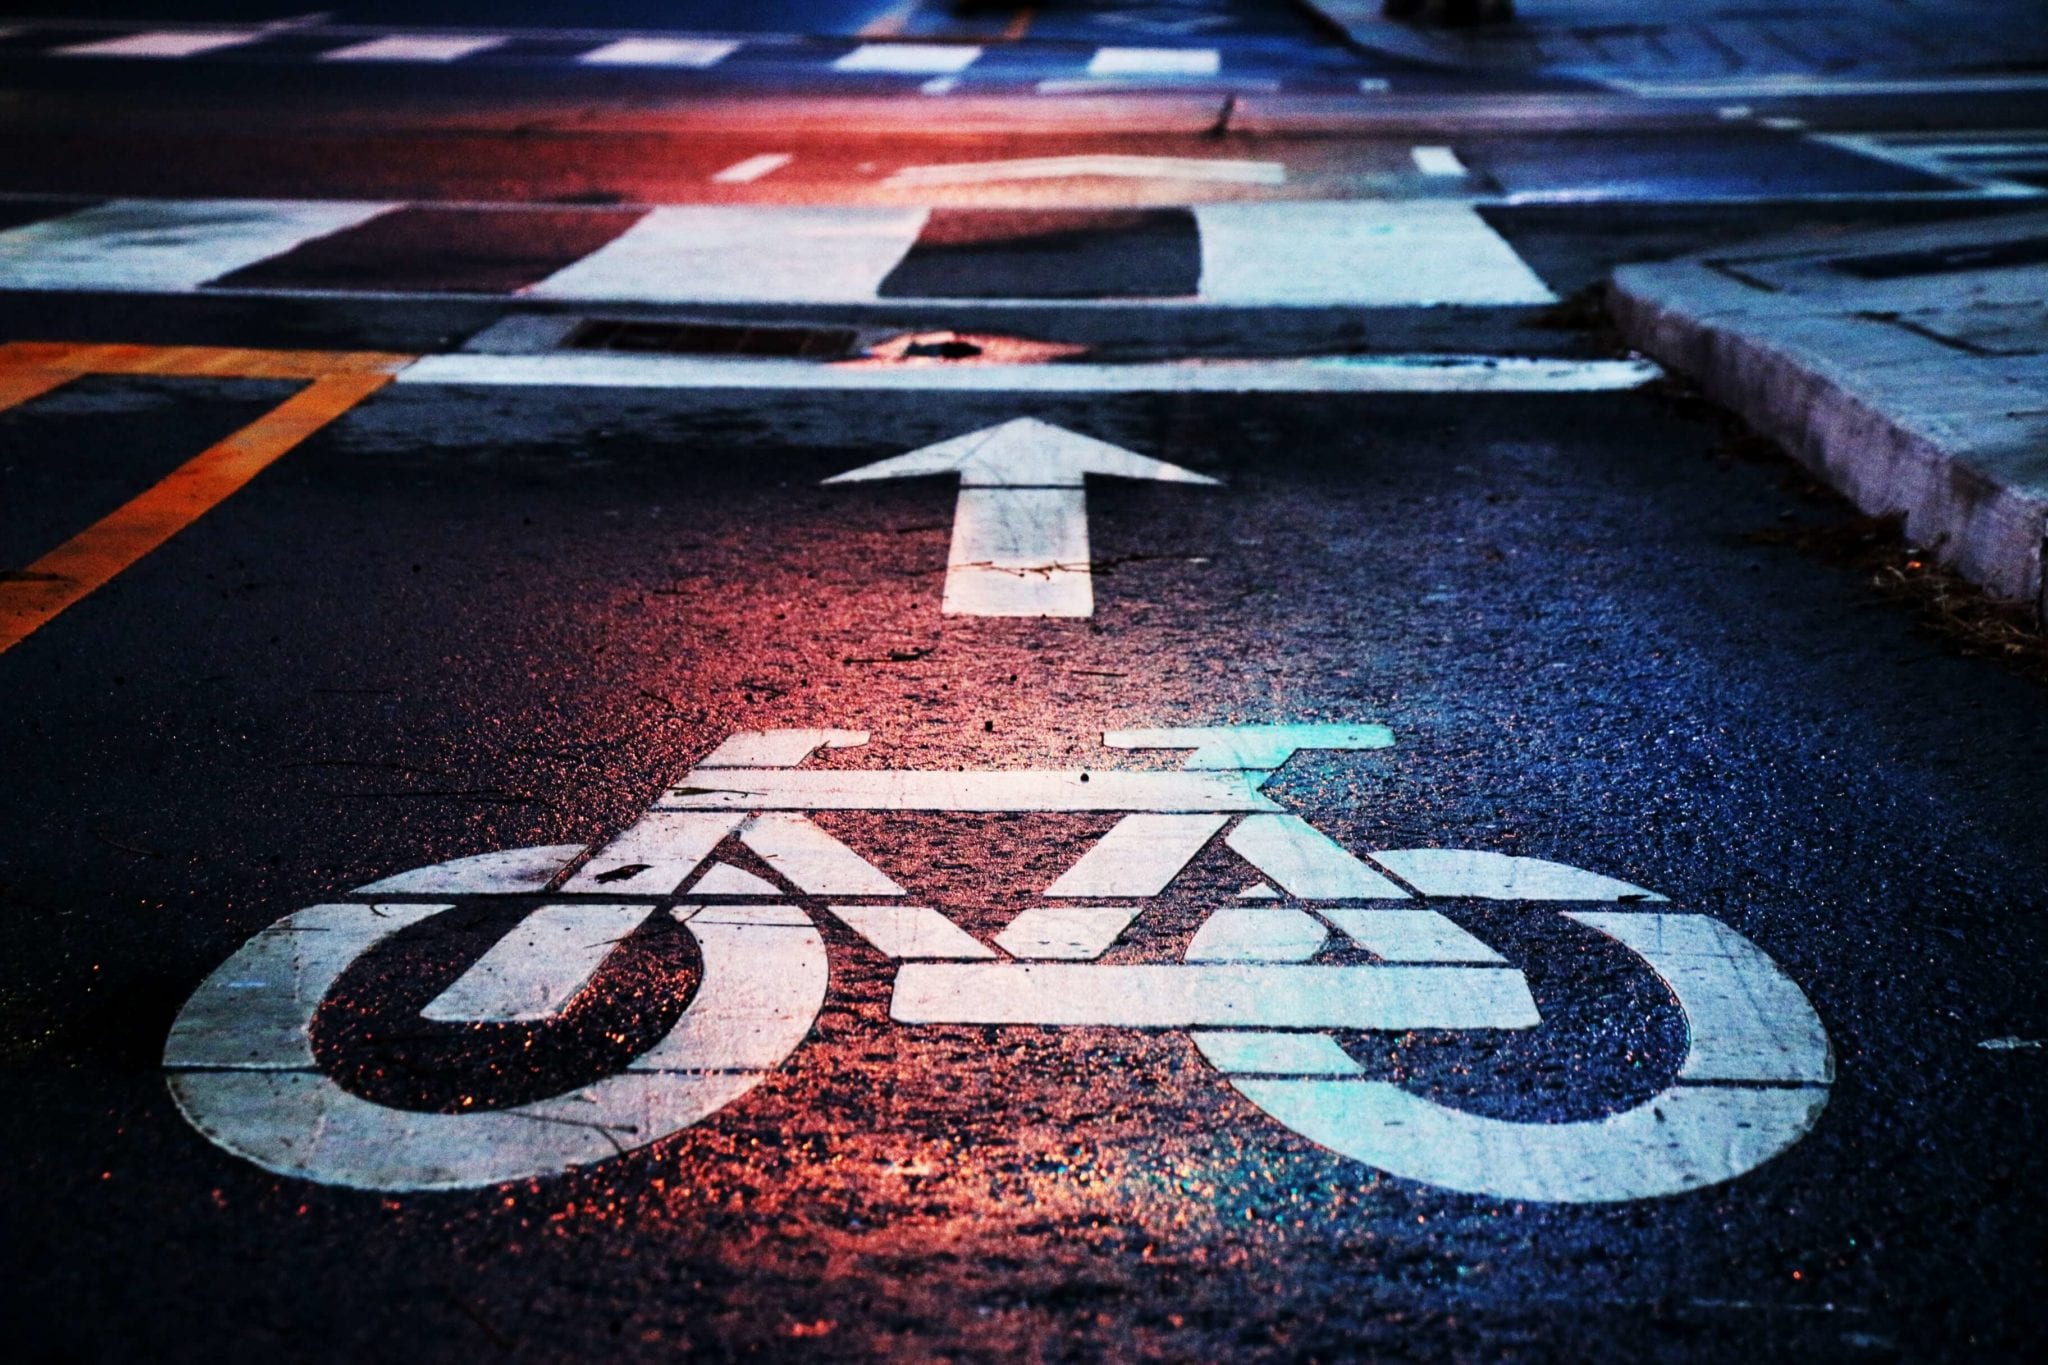 Bicycle accident victims: know your rights for recovery